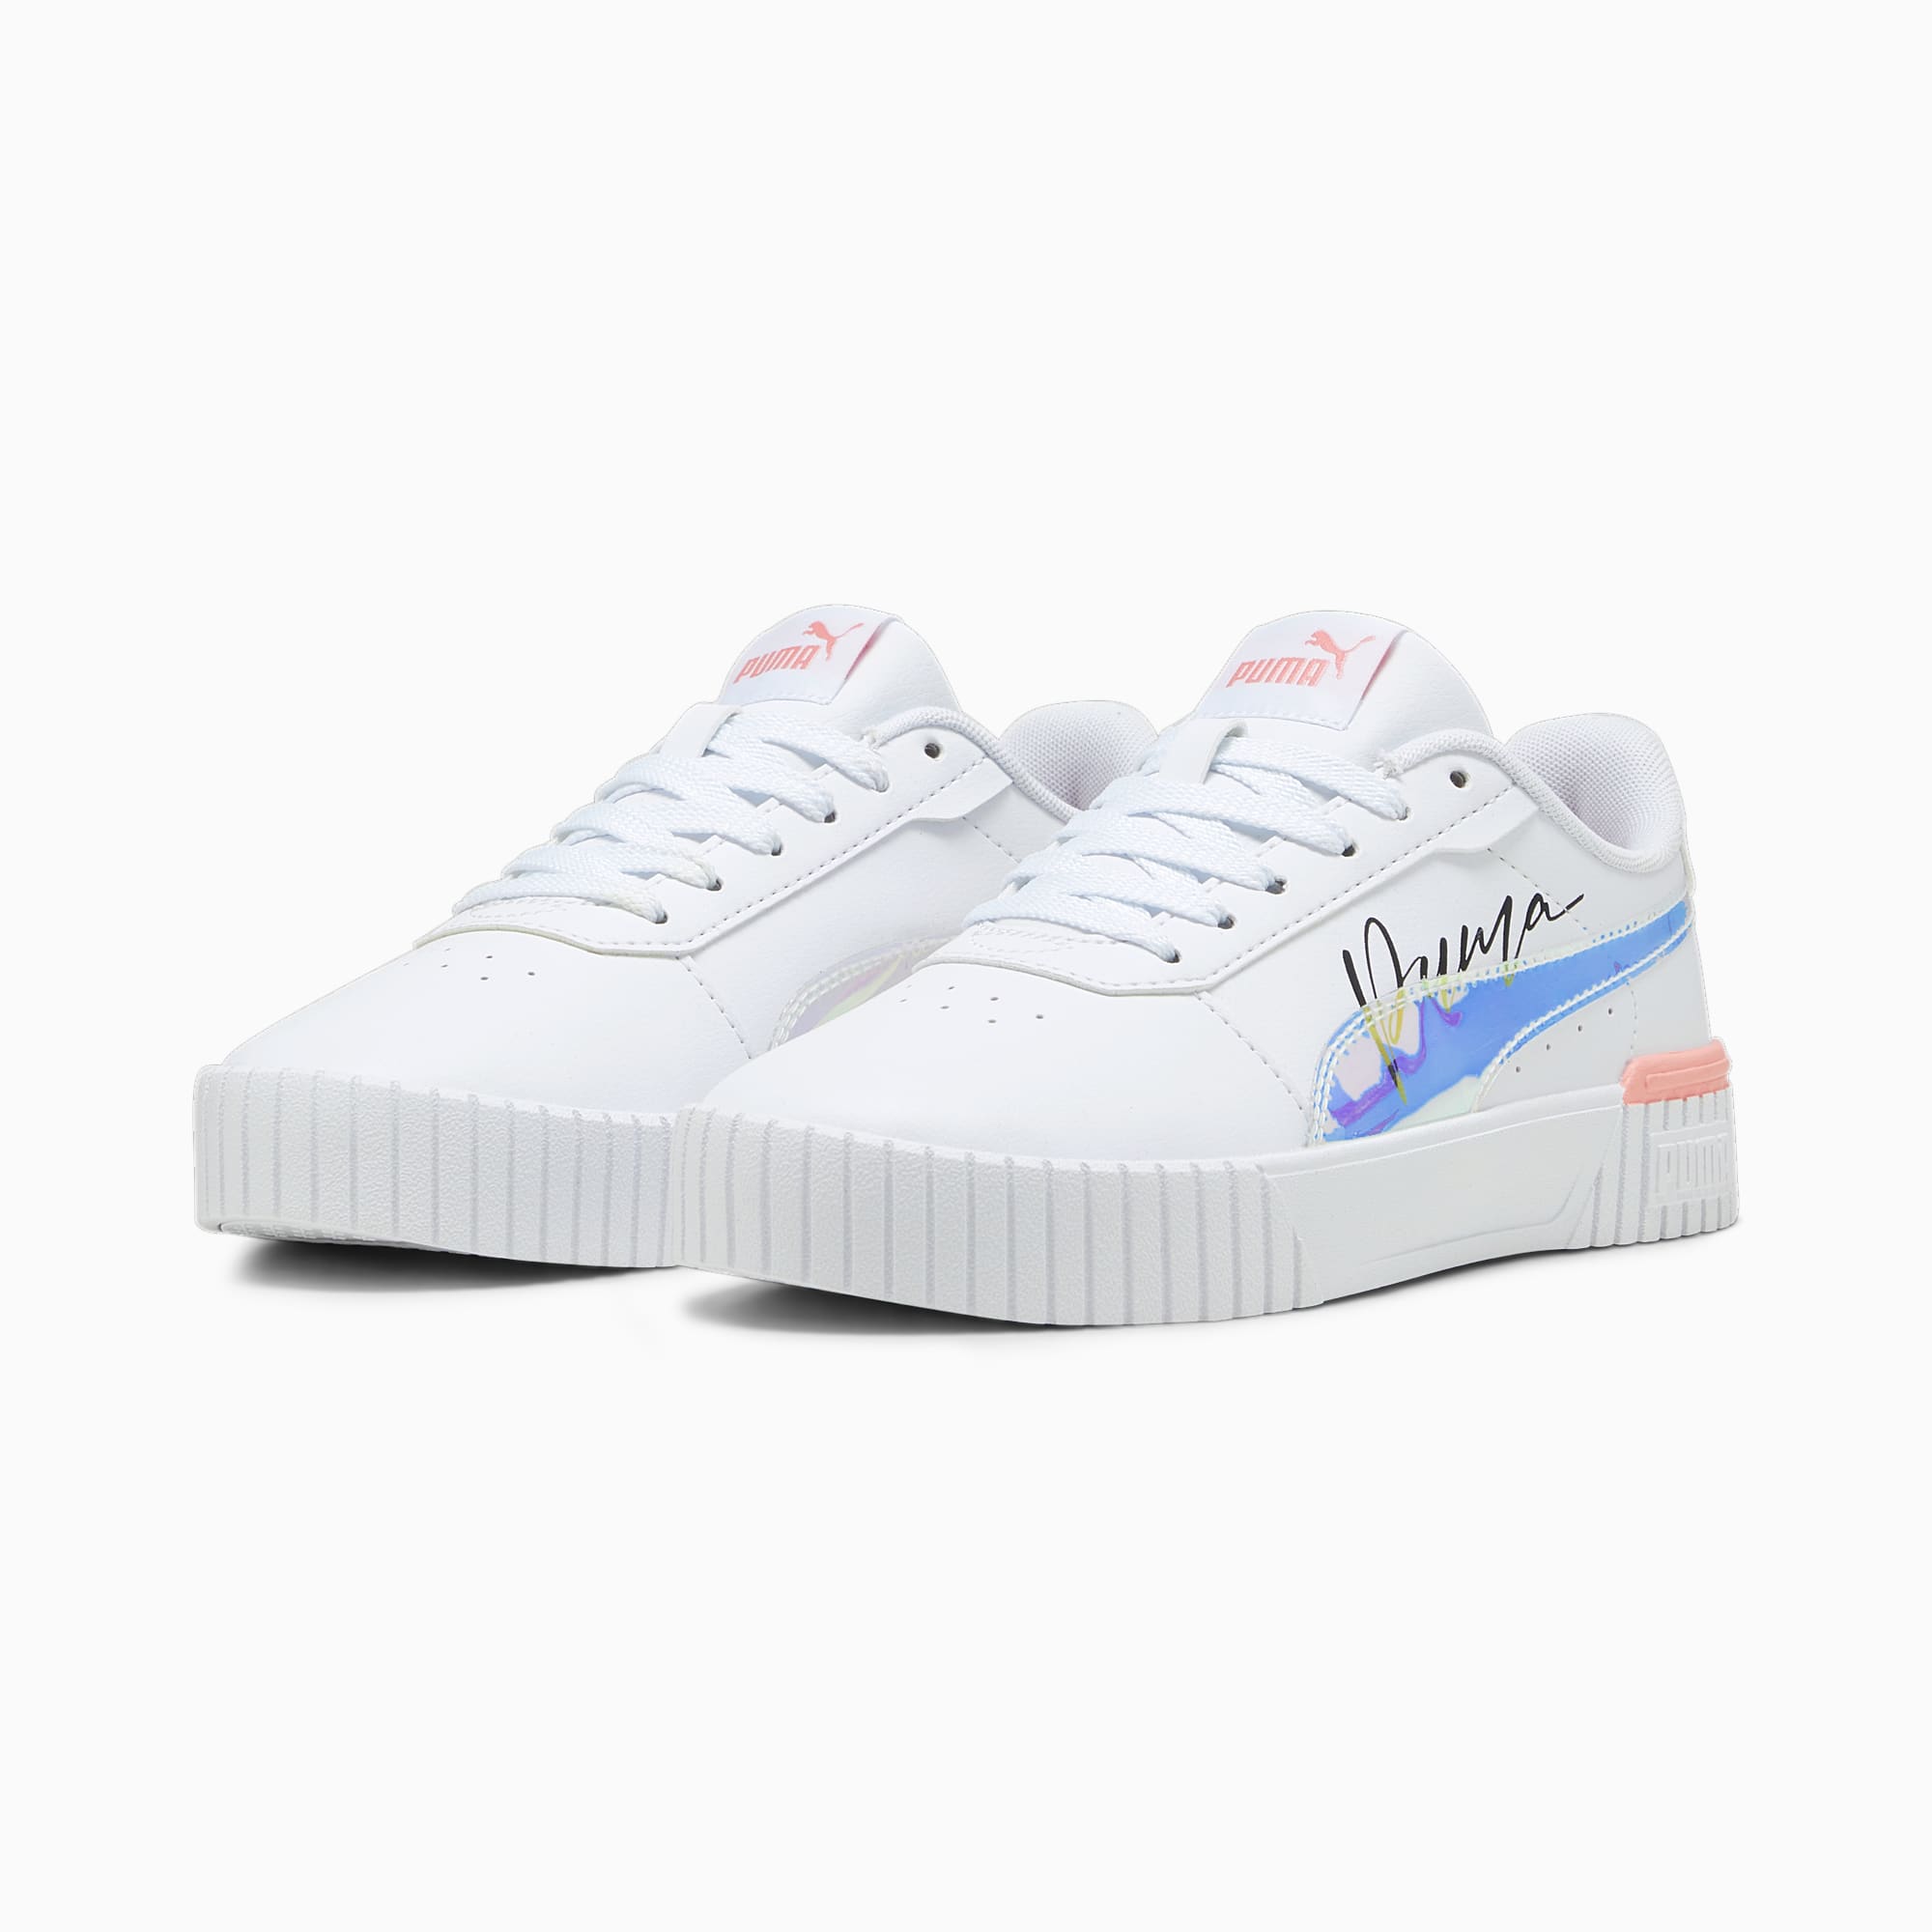 PUMA Carina 2.0 Crystal Wings Youth Sneakers, White/Peach Smoothie/Black